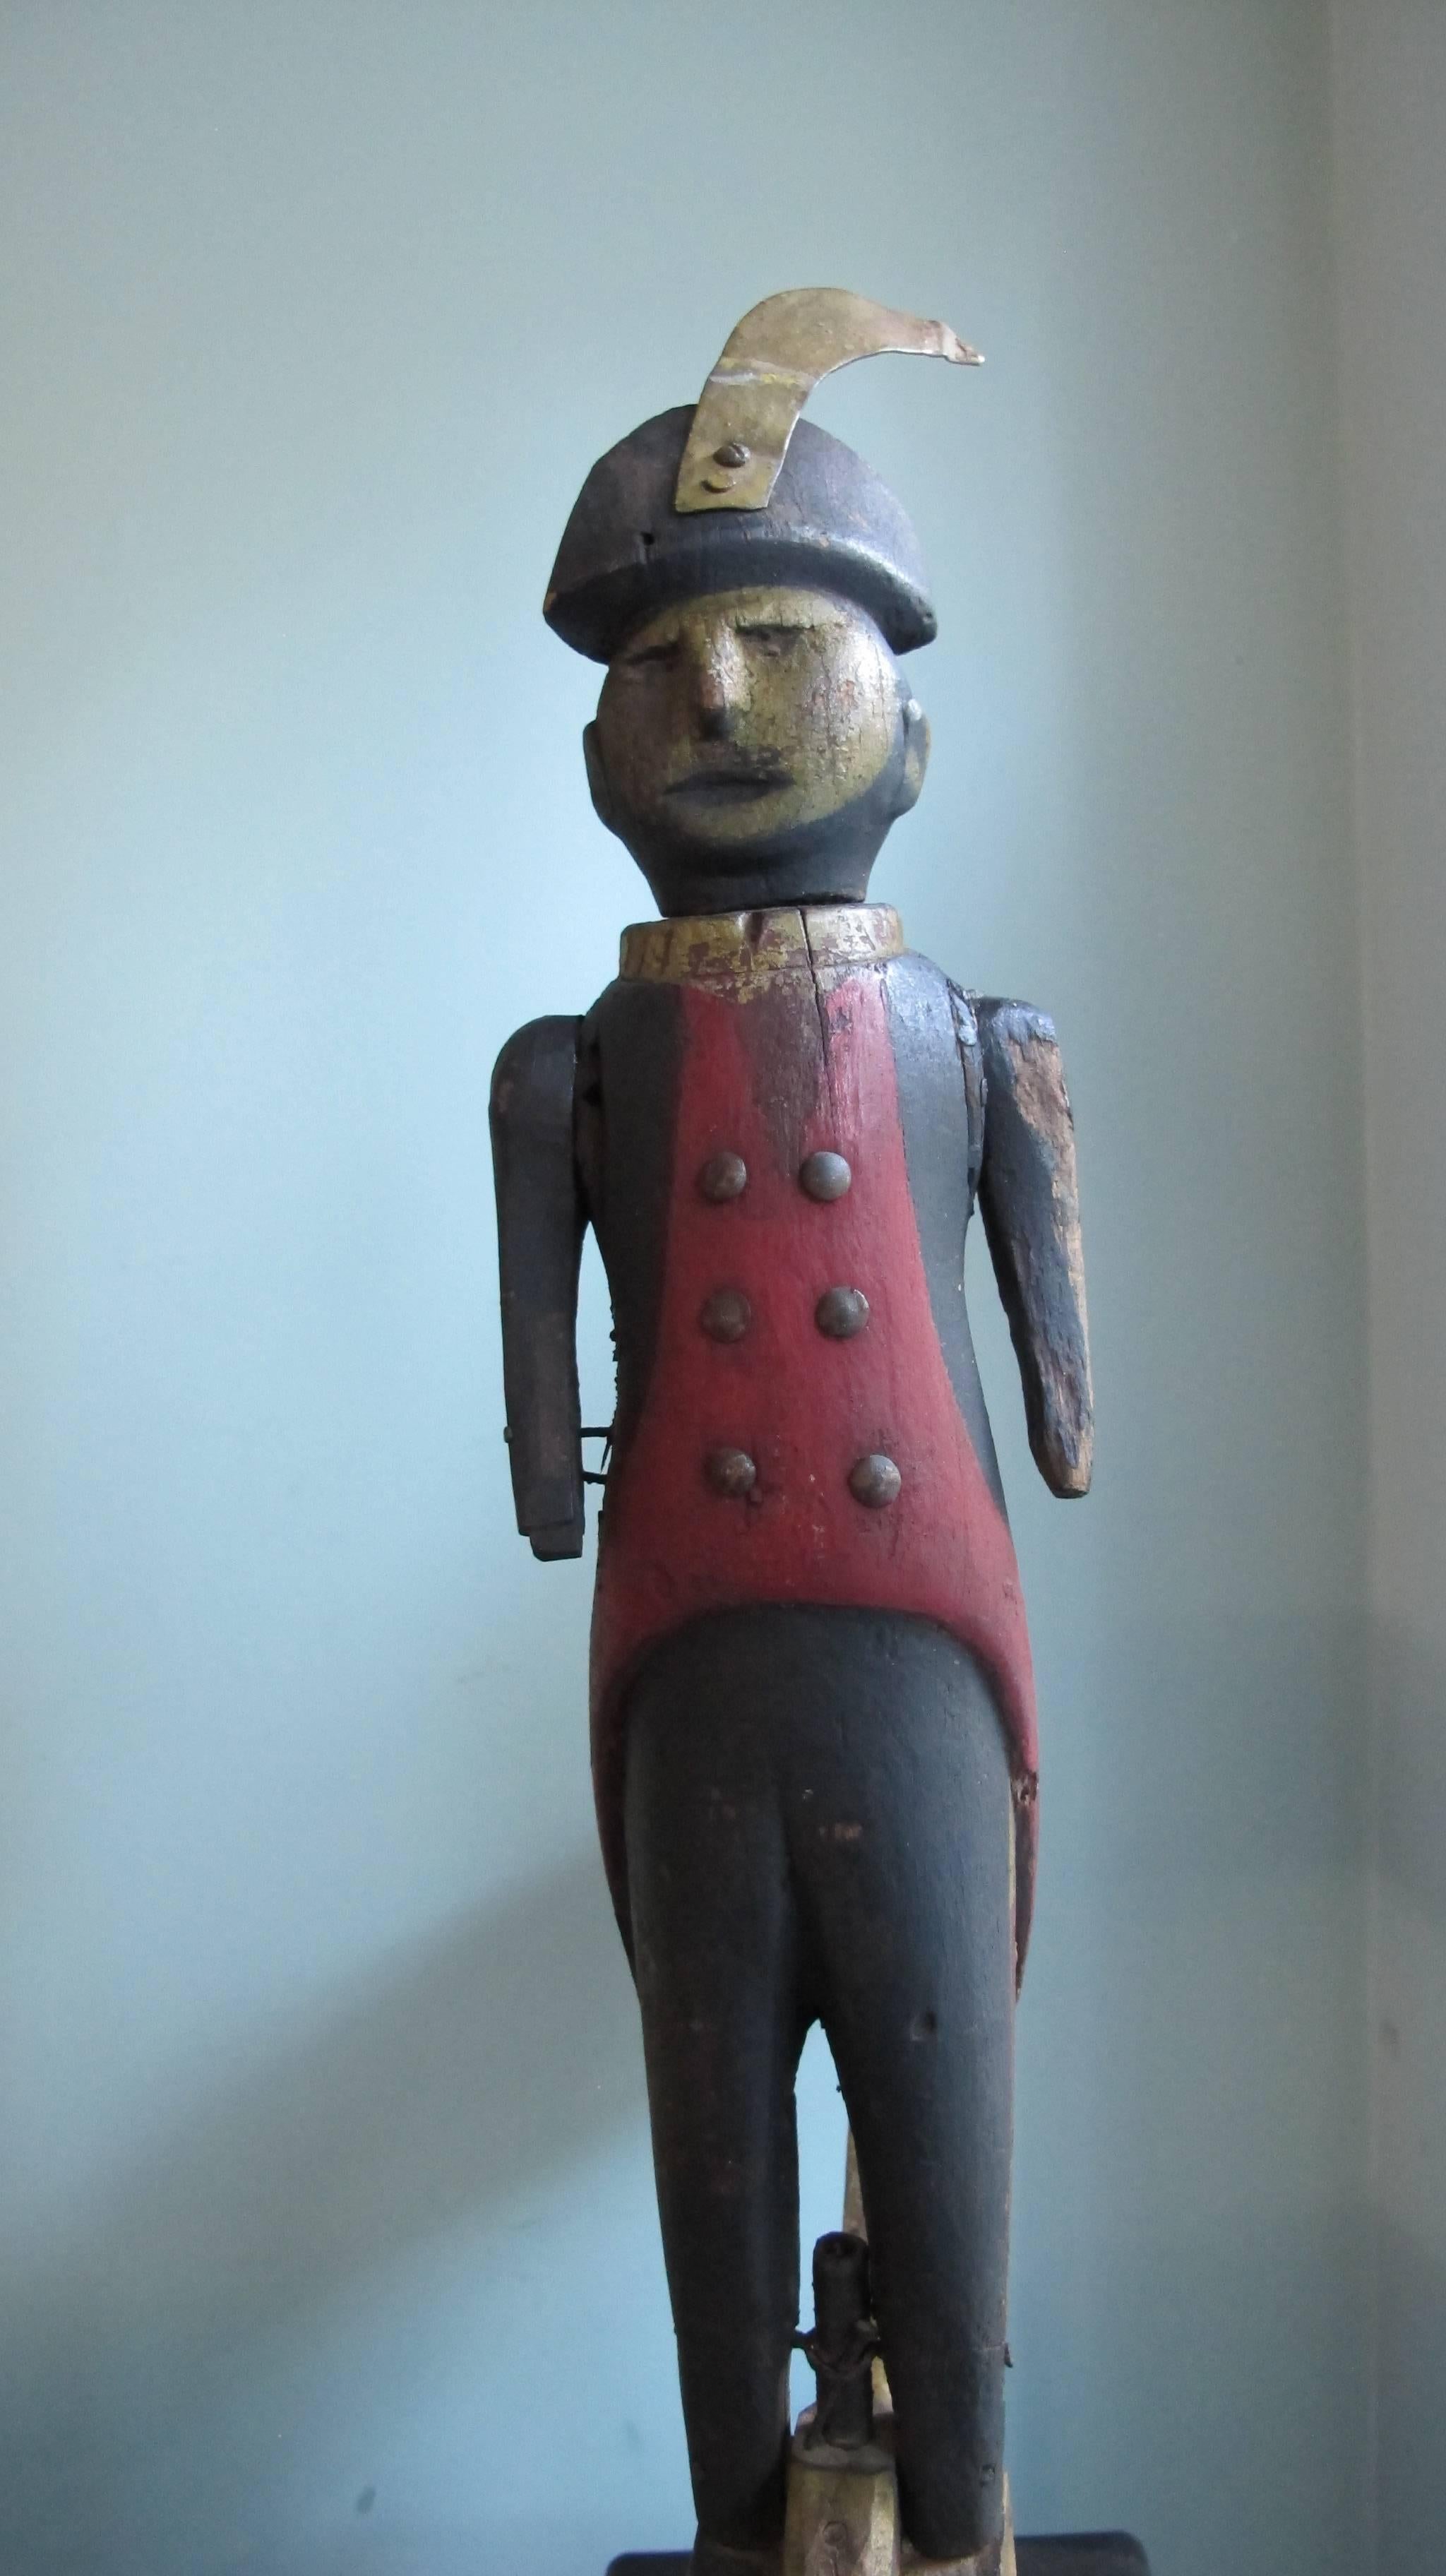 Carved and painted soldier standing on arrow whirligig that also worked as a weathervane with the wooden arrow pointing the wind direction. The figure is wearing a revolutionary war uniform with metal tack buttons and long red tails with stripes on